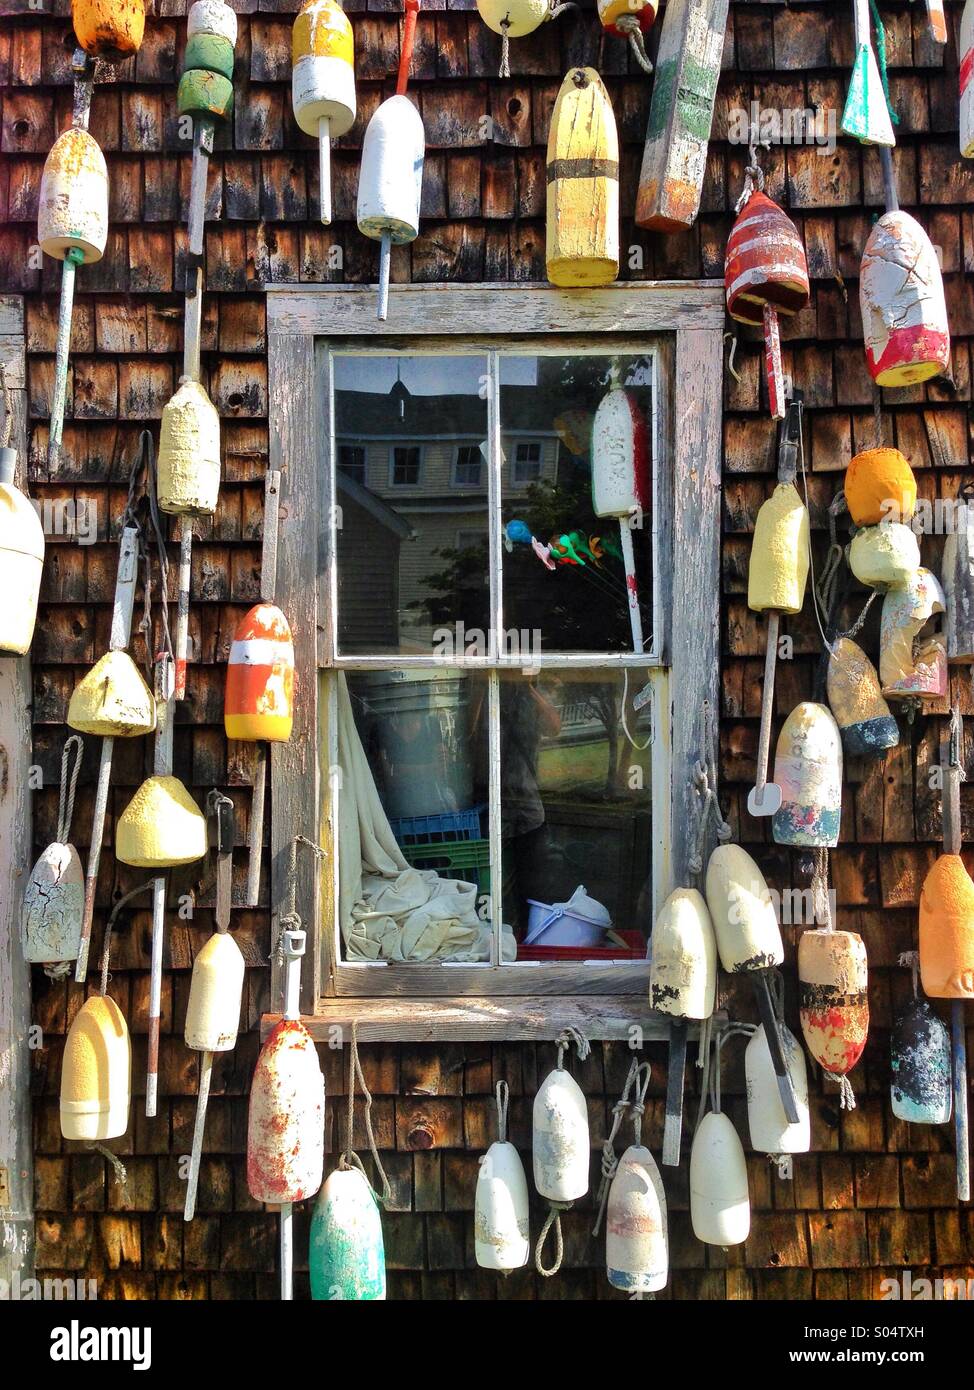 Old lobster buoys on building in Maine, USA Stock Photo - Alamy